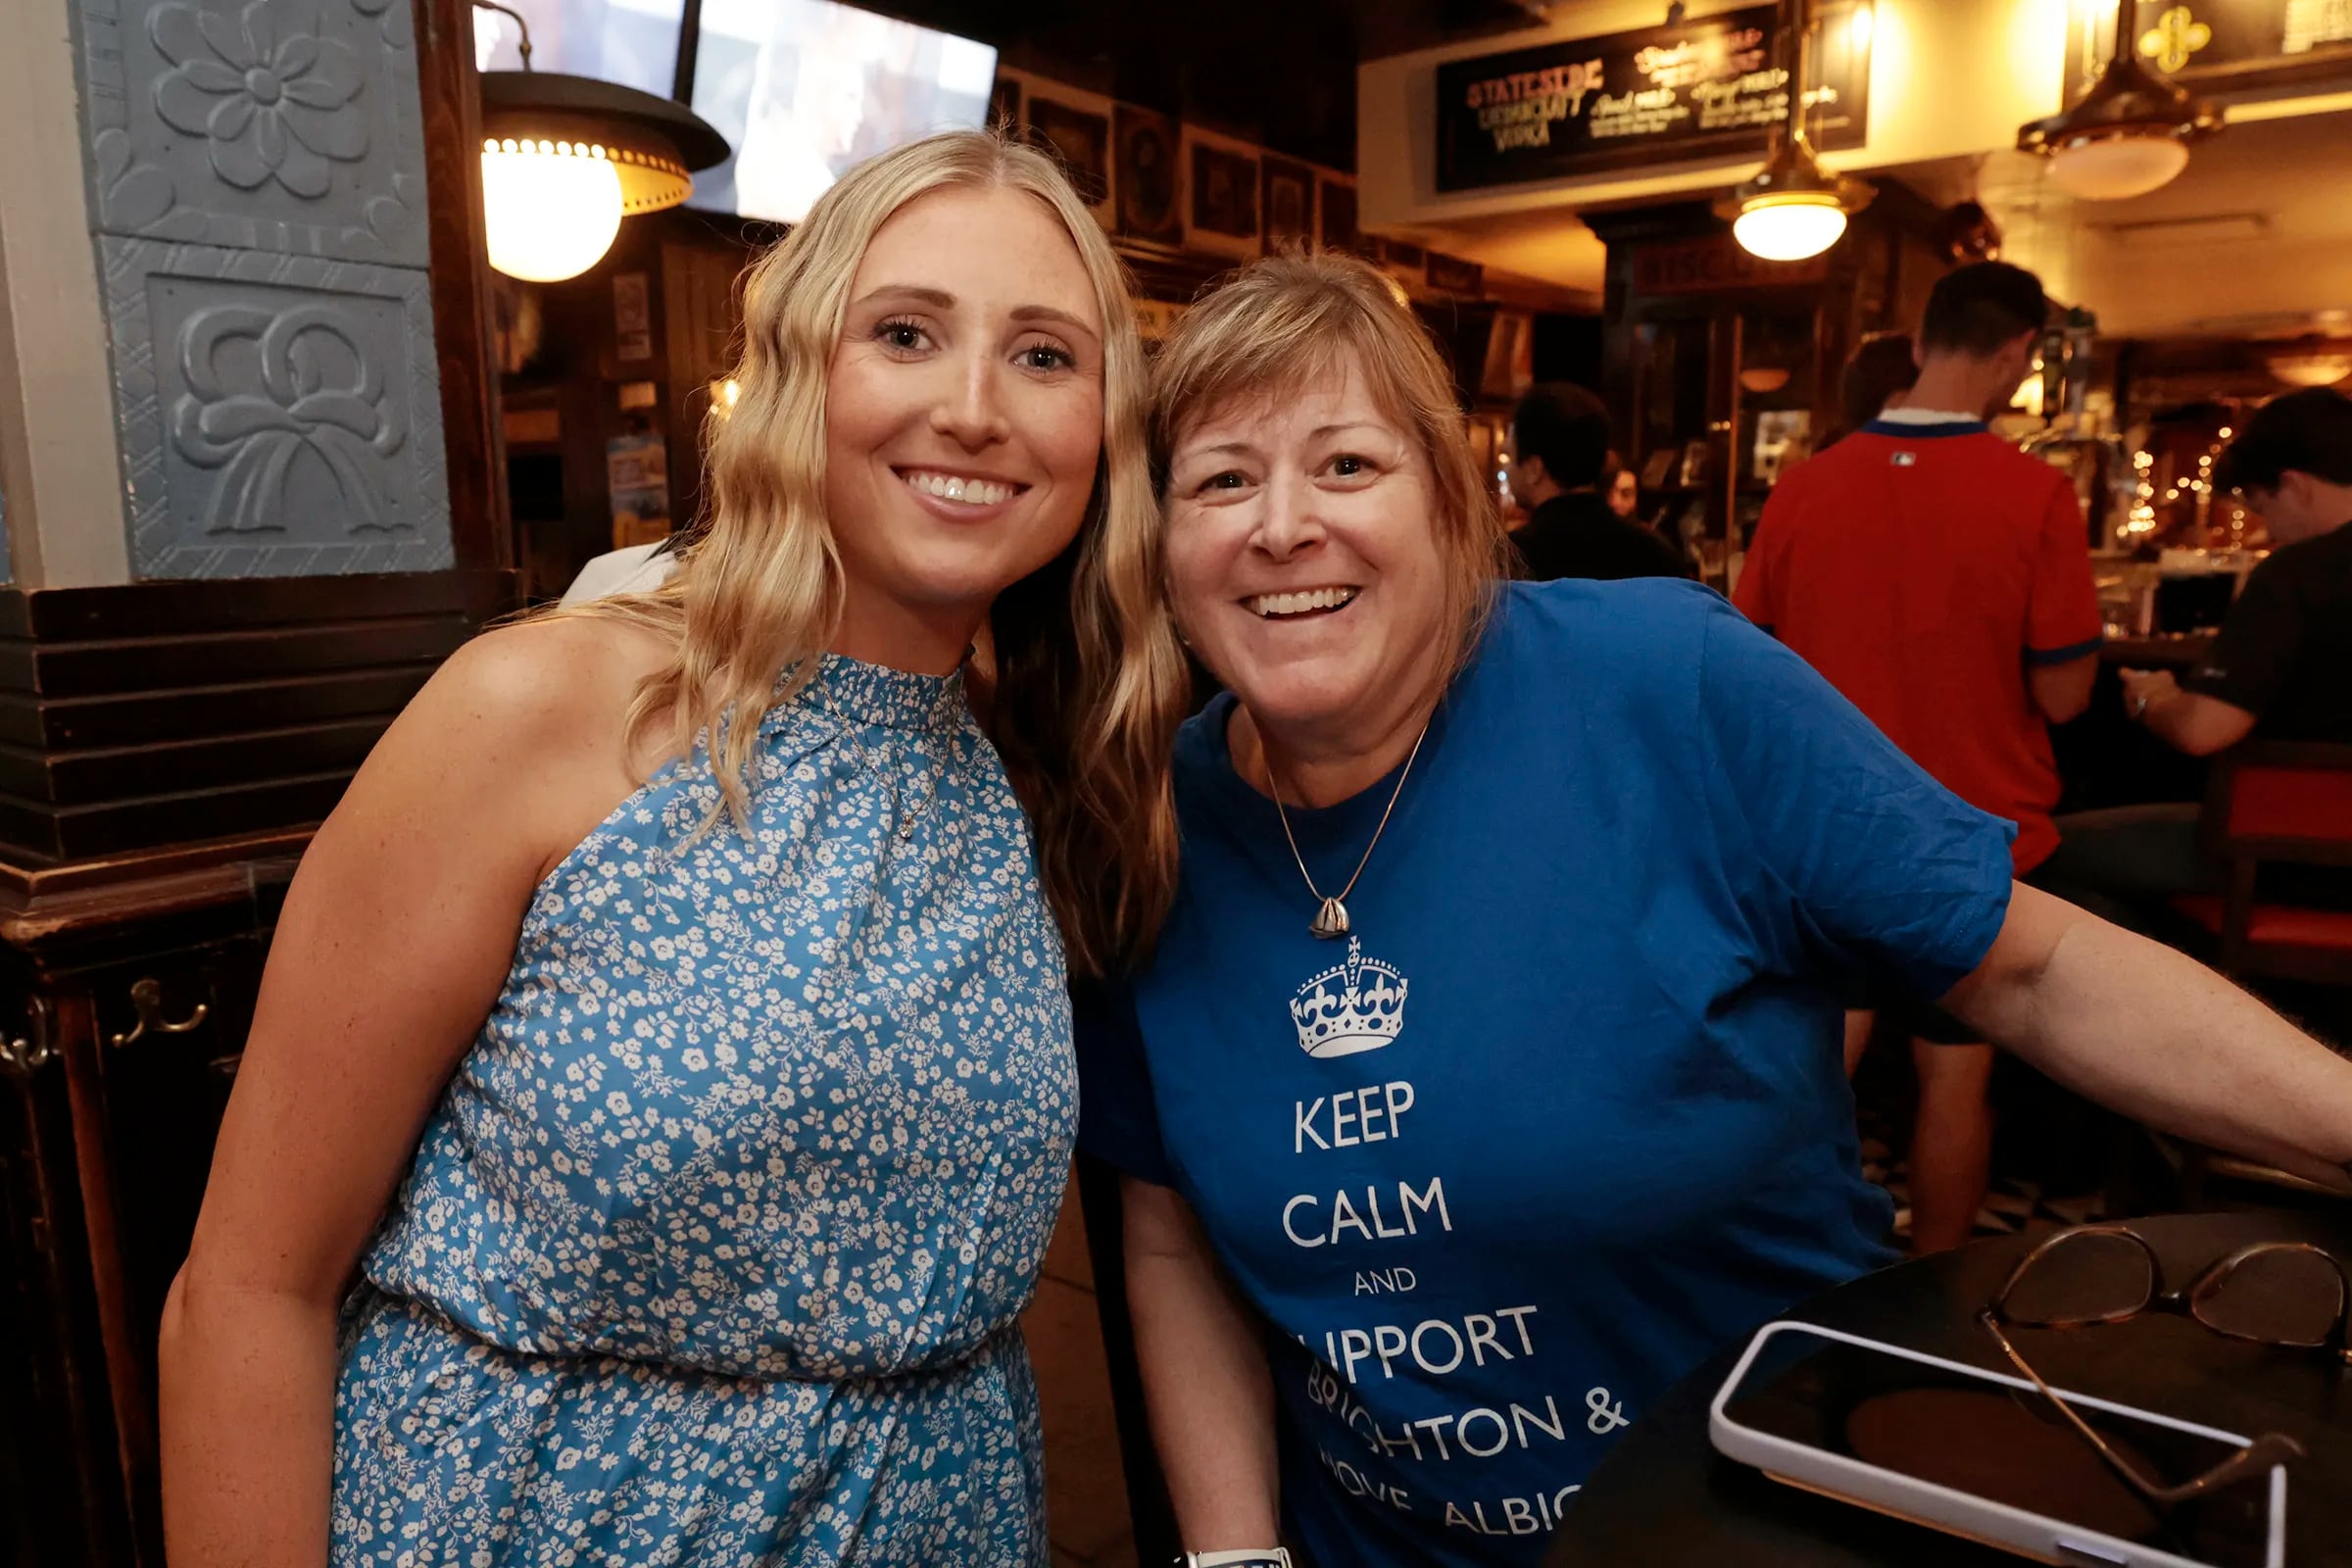 Madeline Hanley of South Philly (left) and Cyndi McKesson of Oconomowoc, Wisc., during the Premier League supporters meetup, to kickoff the summer series weekend, at Fadó Irish Pub in Phila., Pa. on Thursday, July 20, 2023.